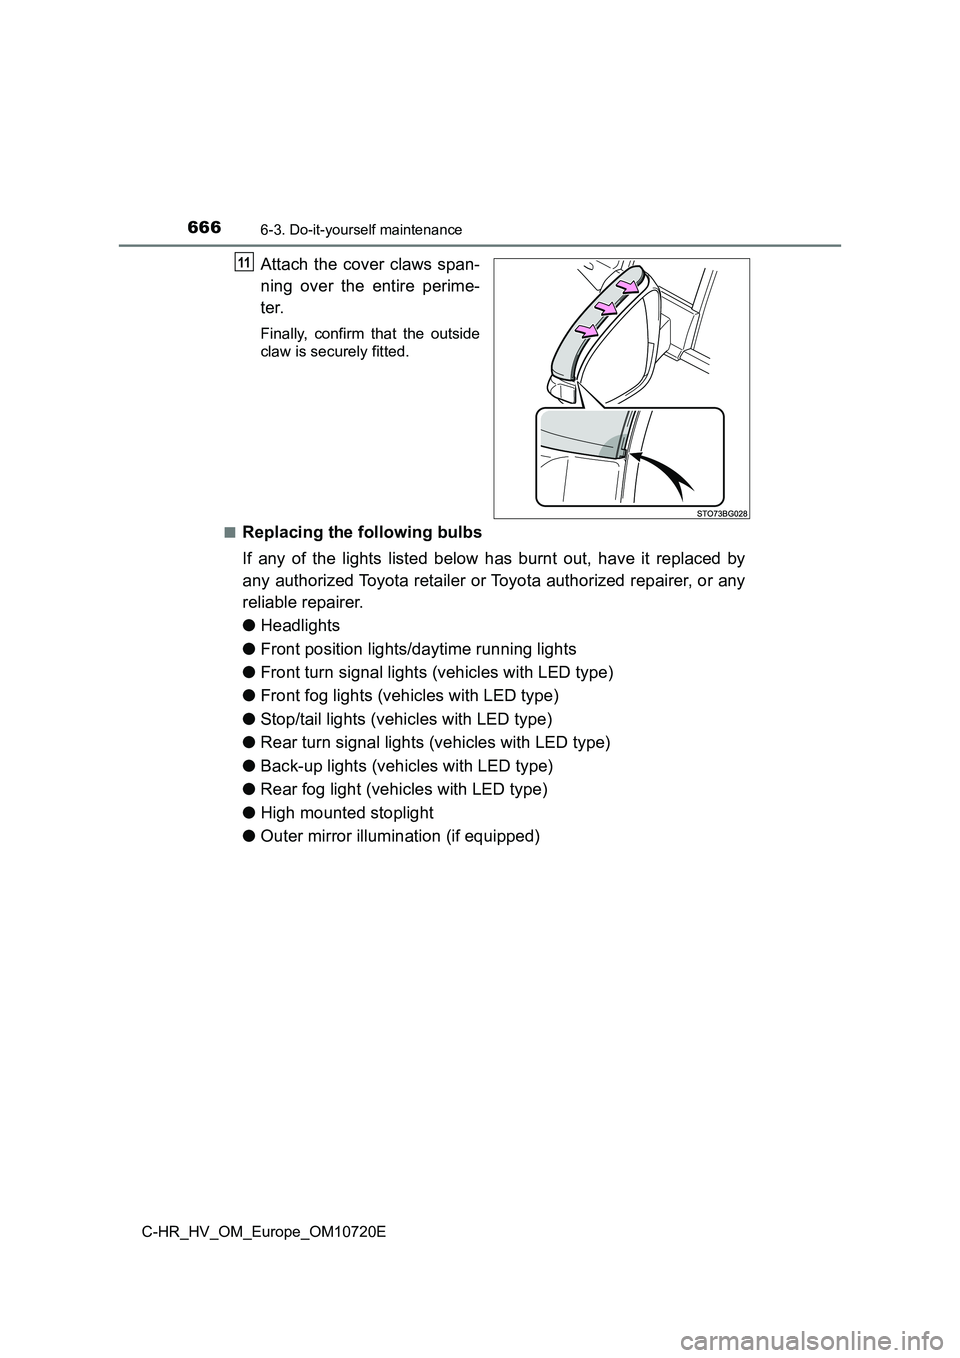 TOYOTA C-HR 2022  Owners Manual 6666-3. Do-it-yourself maintenance
C-HR_HV_OM_Europe_OM10720E
Attach the cover claws span- 
ning  over  the  entire  perime- 
ter.
Finally,  confirm  that  the  outside 
claw is securely fitted. 
■R